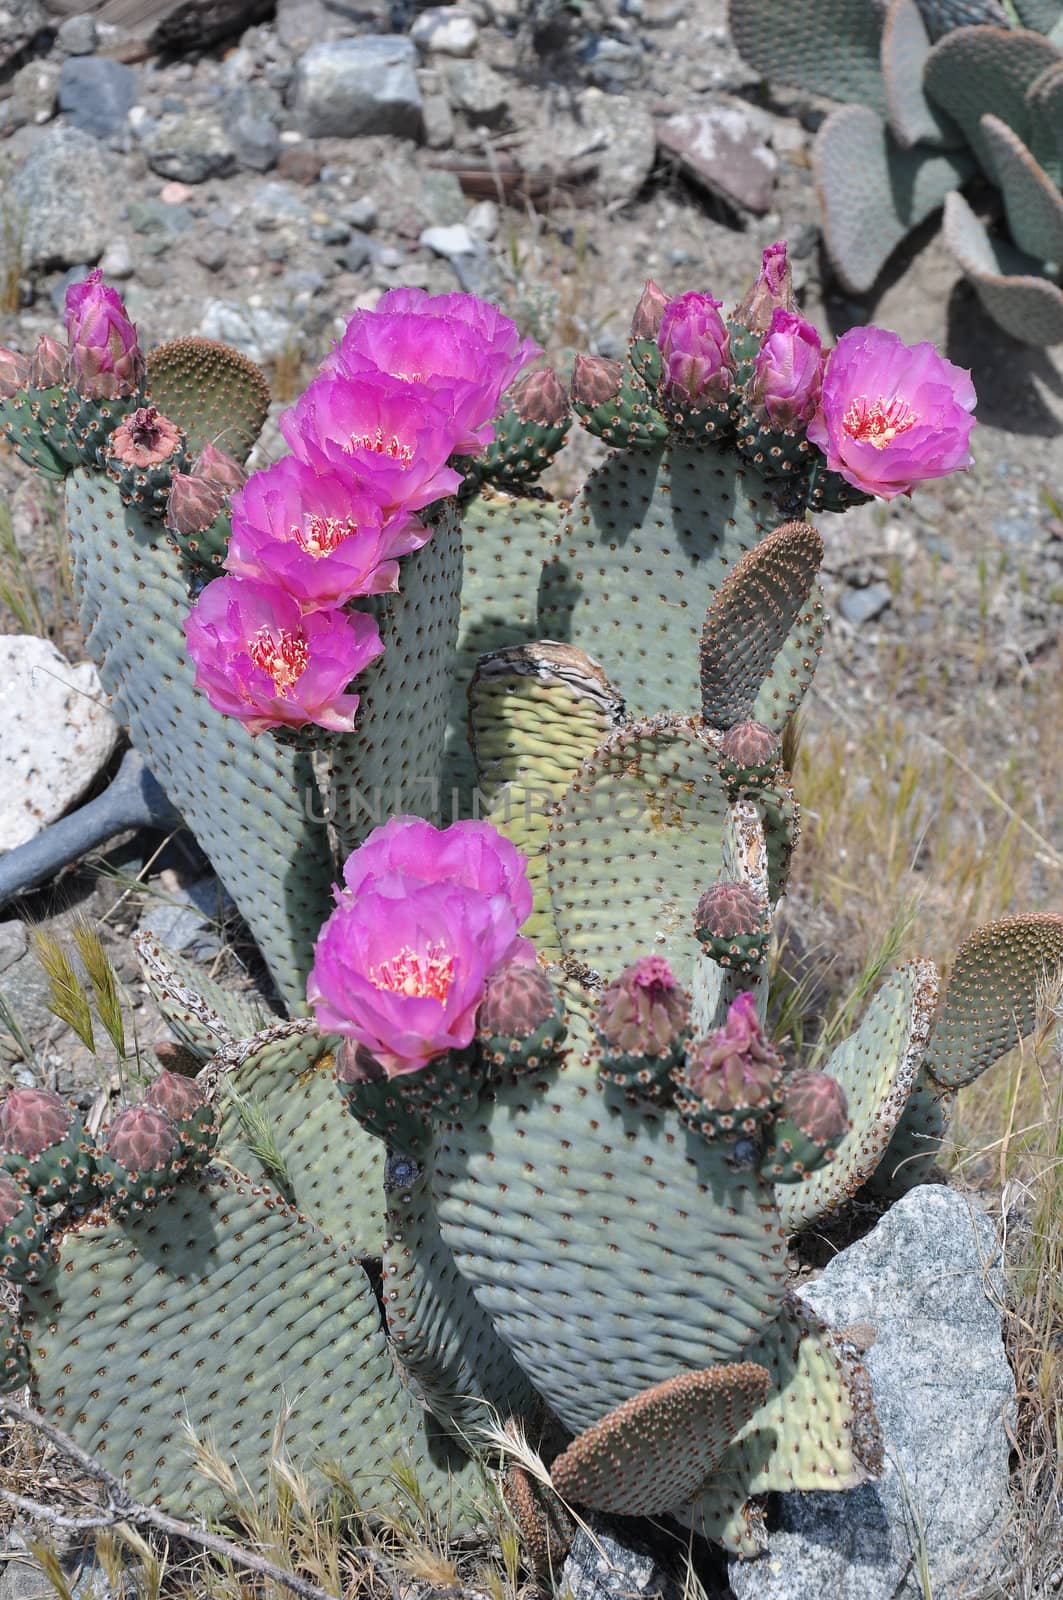 Bright colored flowers blossom during Springtime on stands of cactus in the Southern California desert.